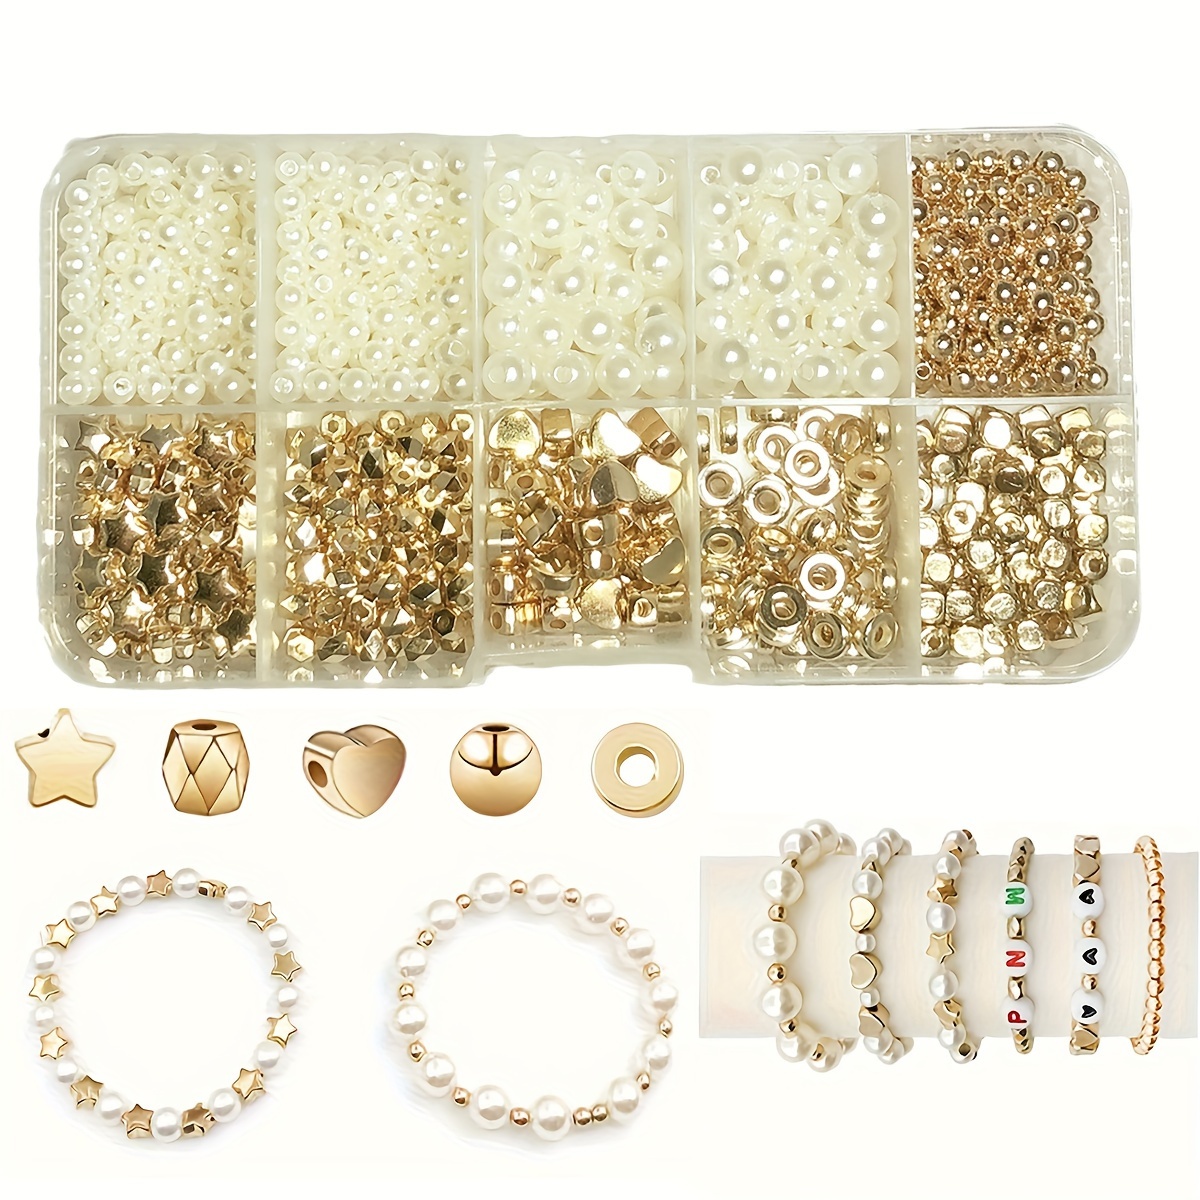 

Elegant Diy Jewelry Making Kit - 650pcs White Star & Heart Acrylic Pearls, Polished Loose Beads For Bracelets, Waist Chains, Anklets, Phone Charms & More Accessories